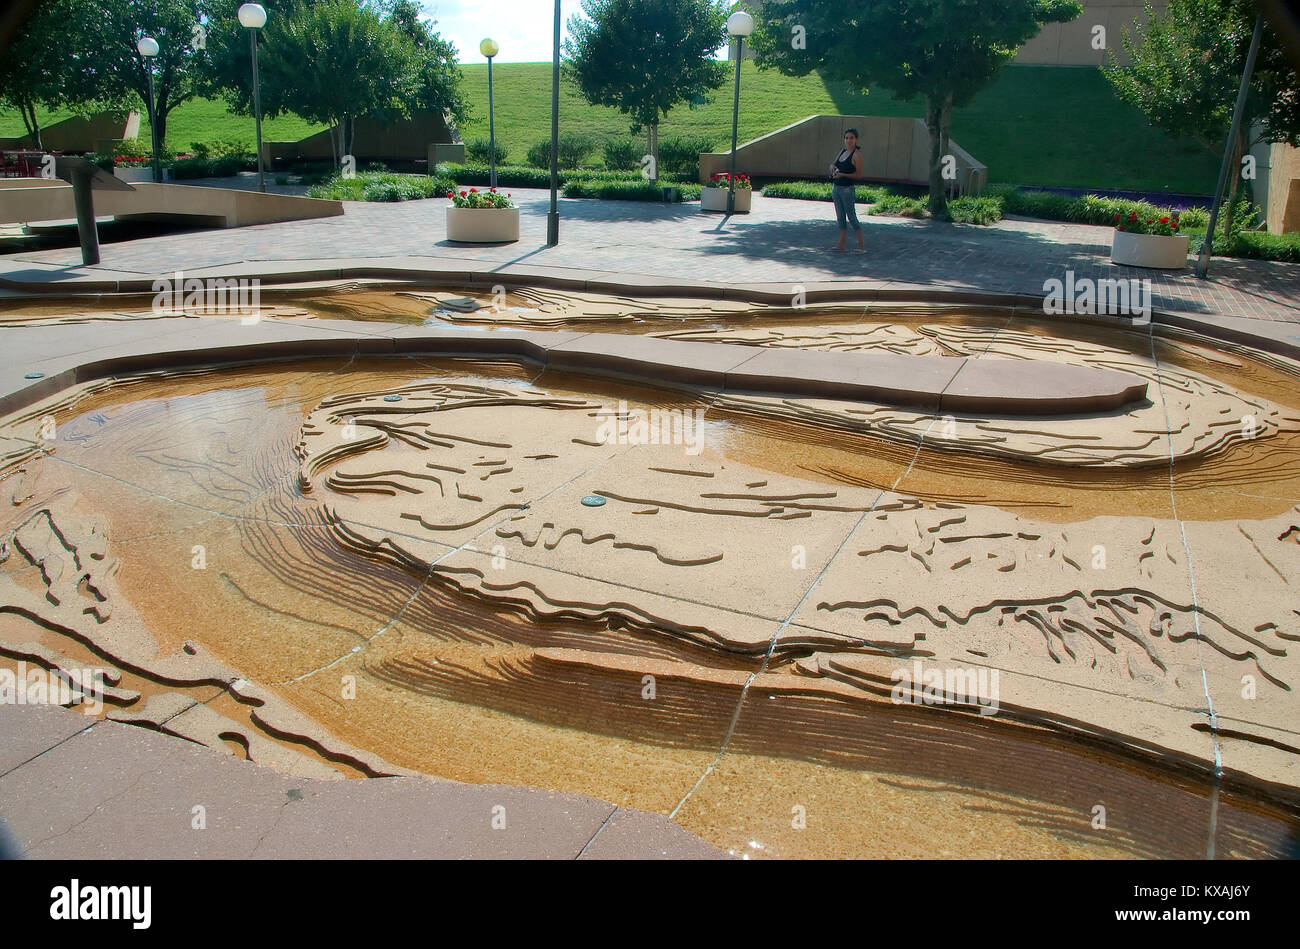 Memphis, Tennessee - 2017: Mississippi River Park, Mud Island, including a hydraulic scale model of the lower Mississippi River and coastal cities. Stock Photo